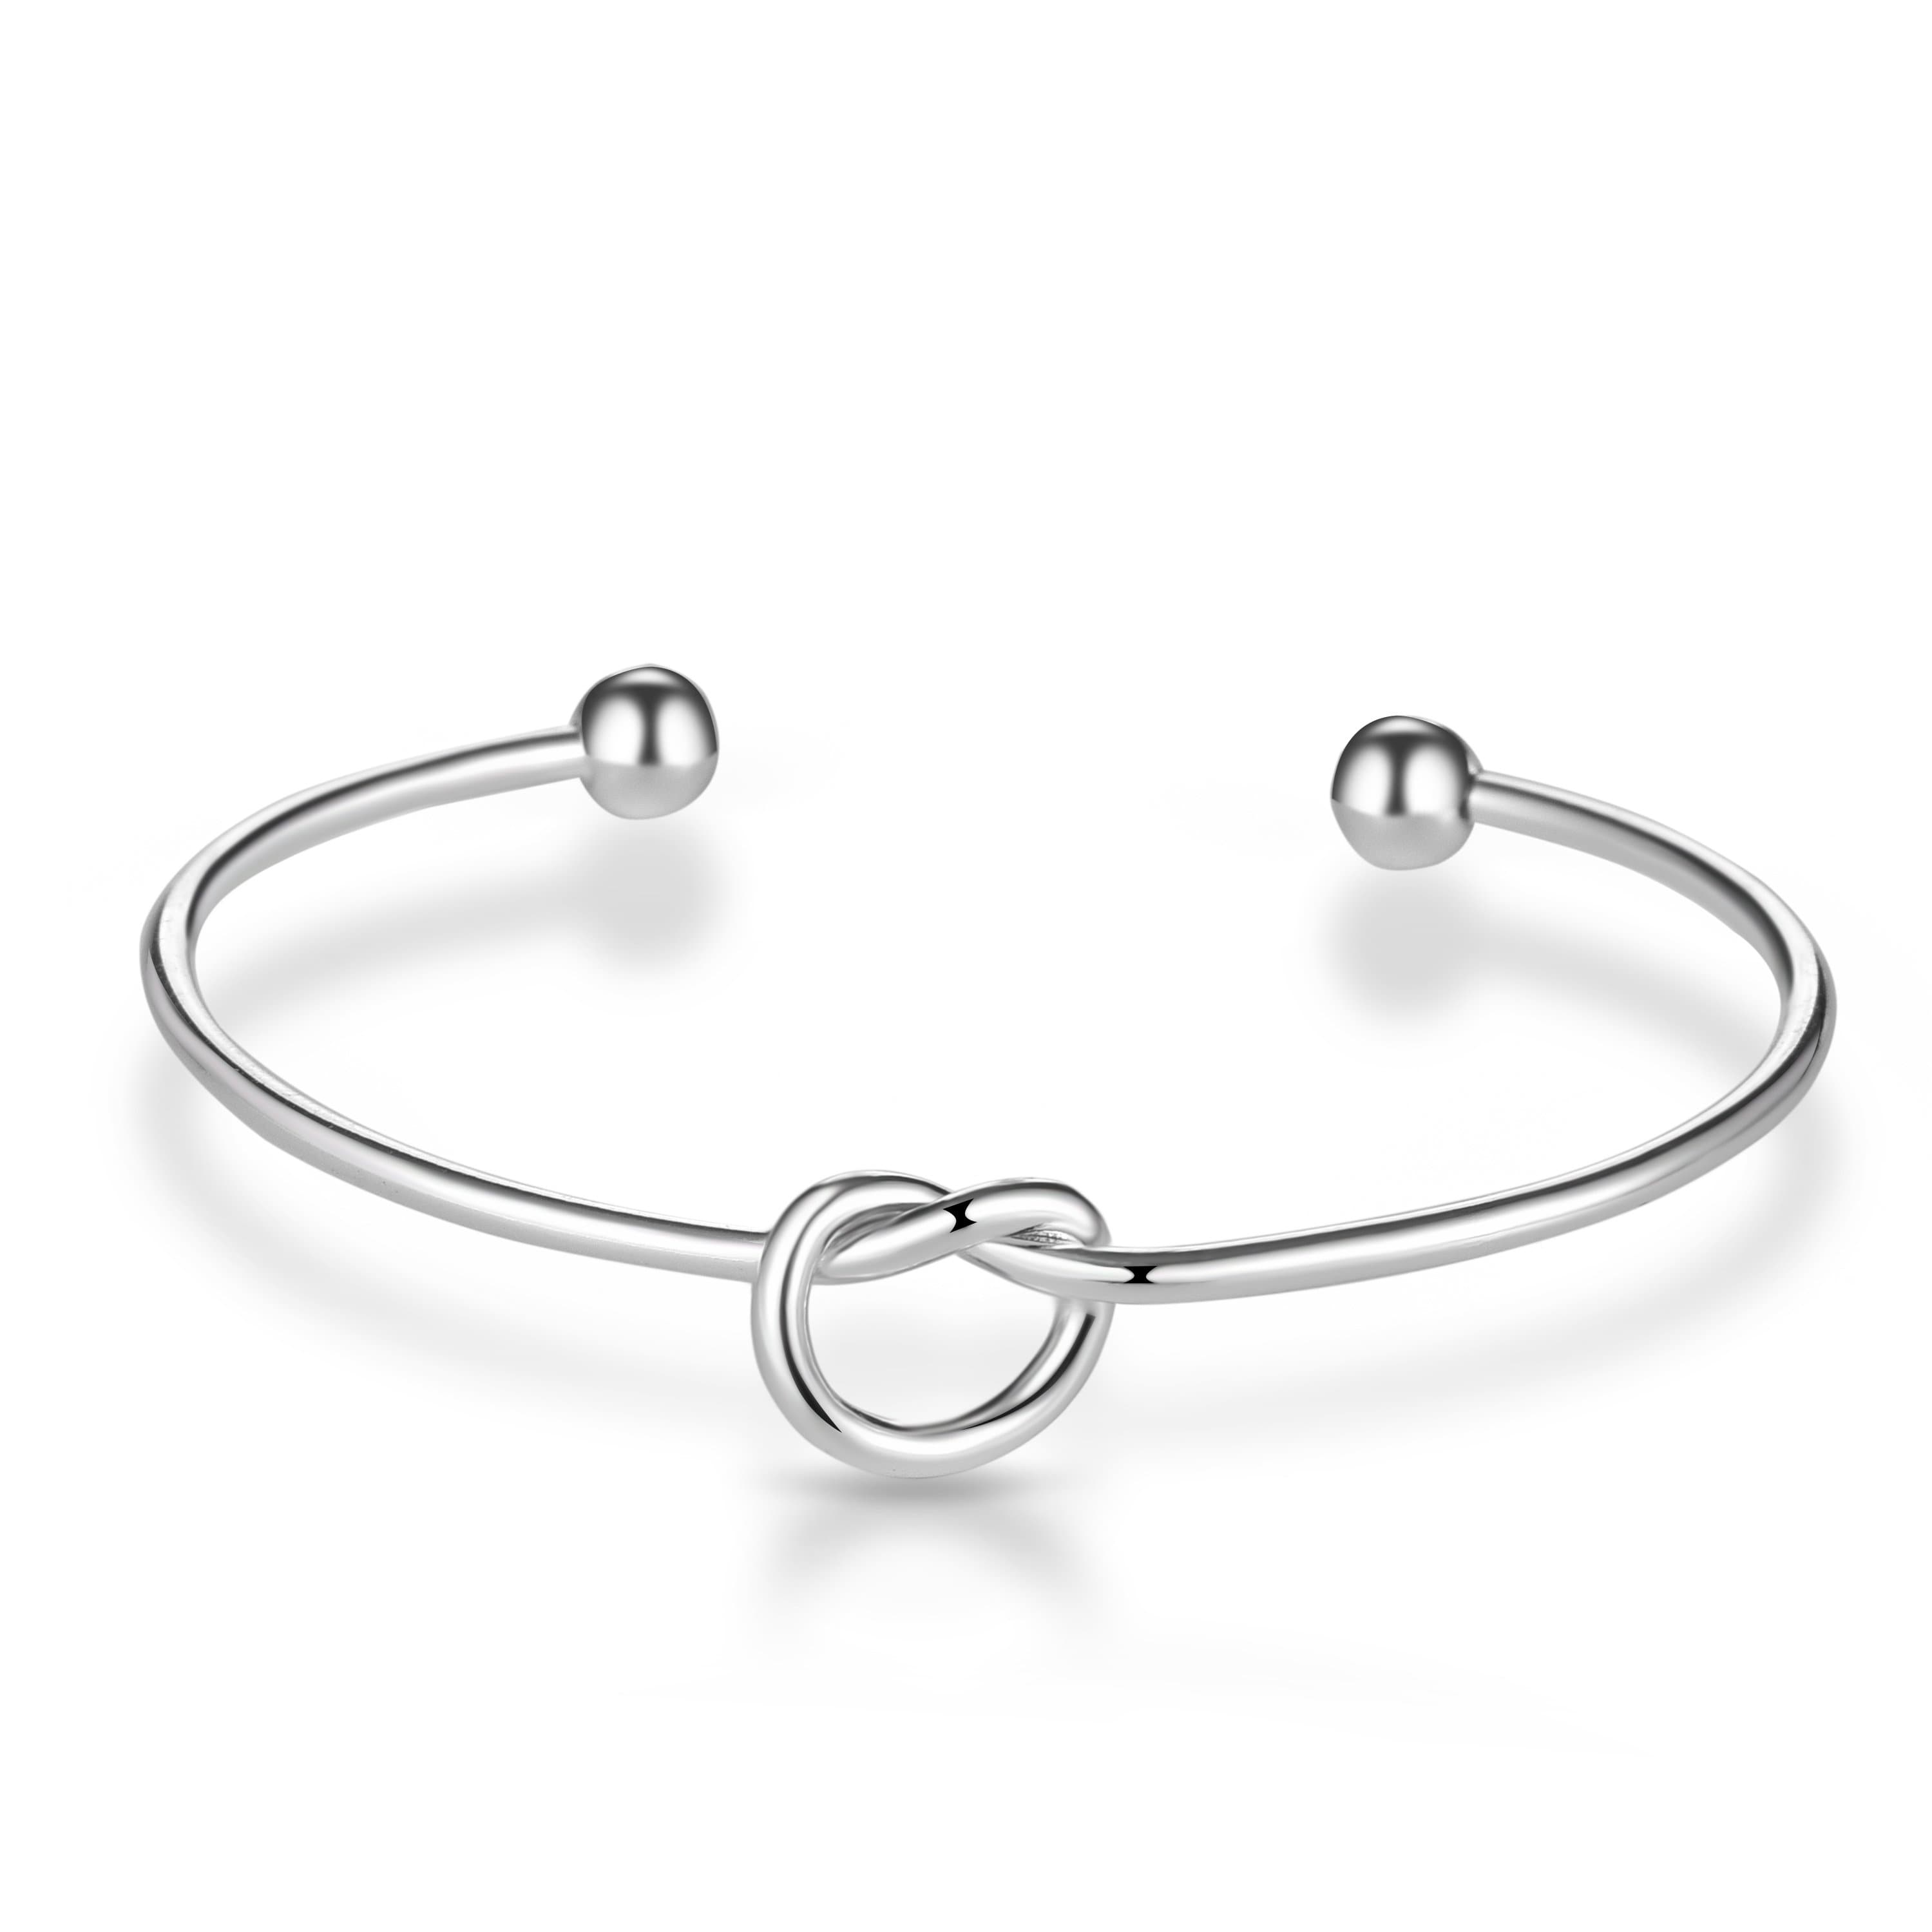 Silver Plated Love Knot Cuff Bangle by Philip Jones Jewellery